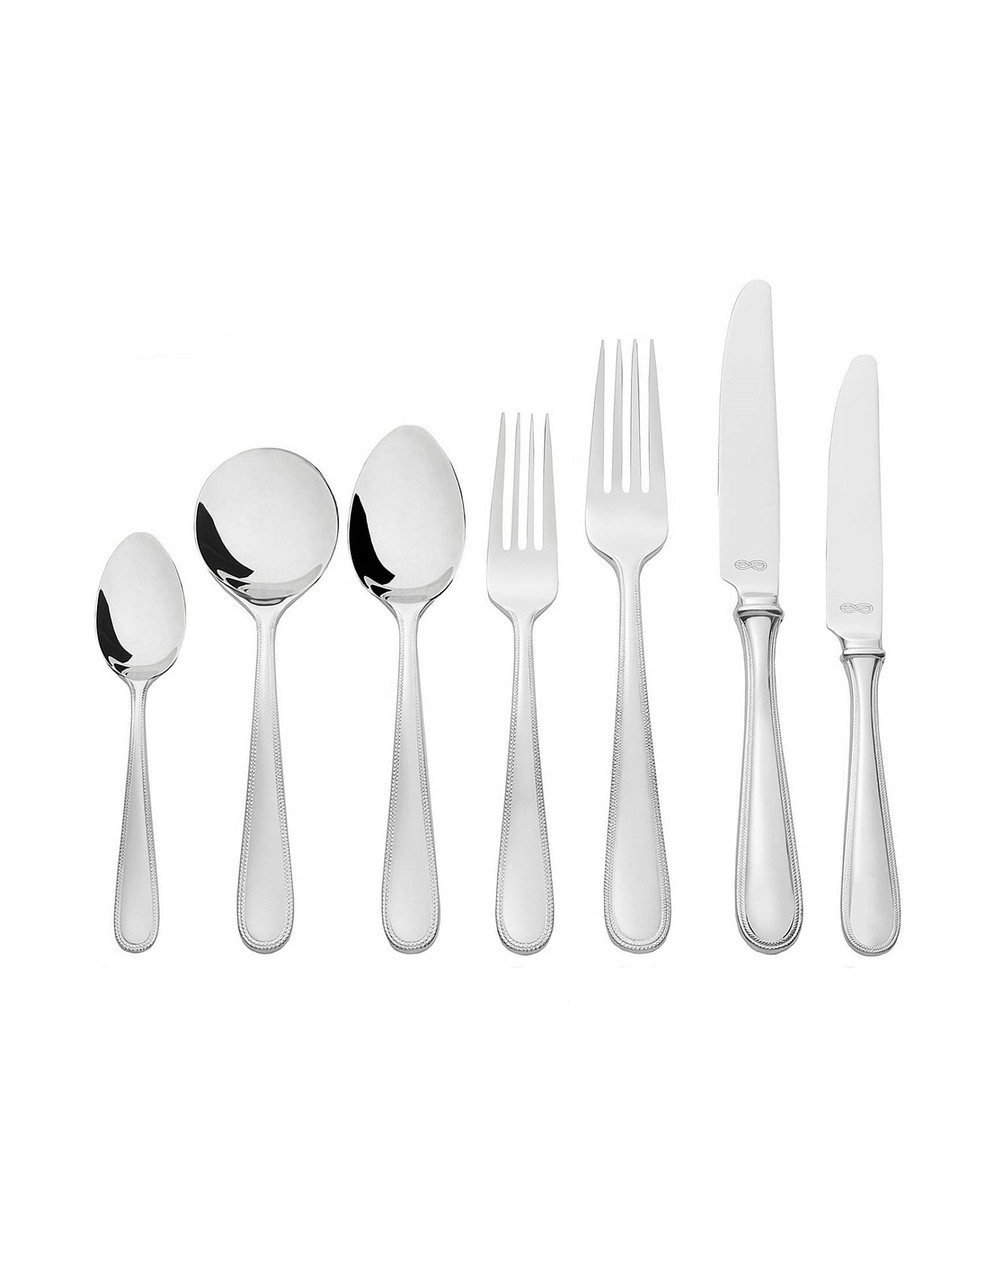 Vera Wang Wedgwood Grosgrain 5-Piece Place Setting, Service for by Wedgwood - 3